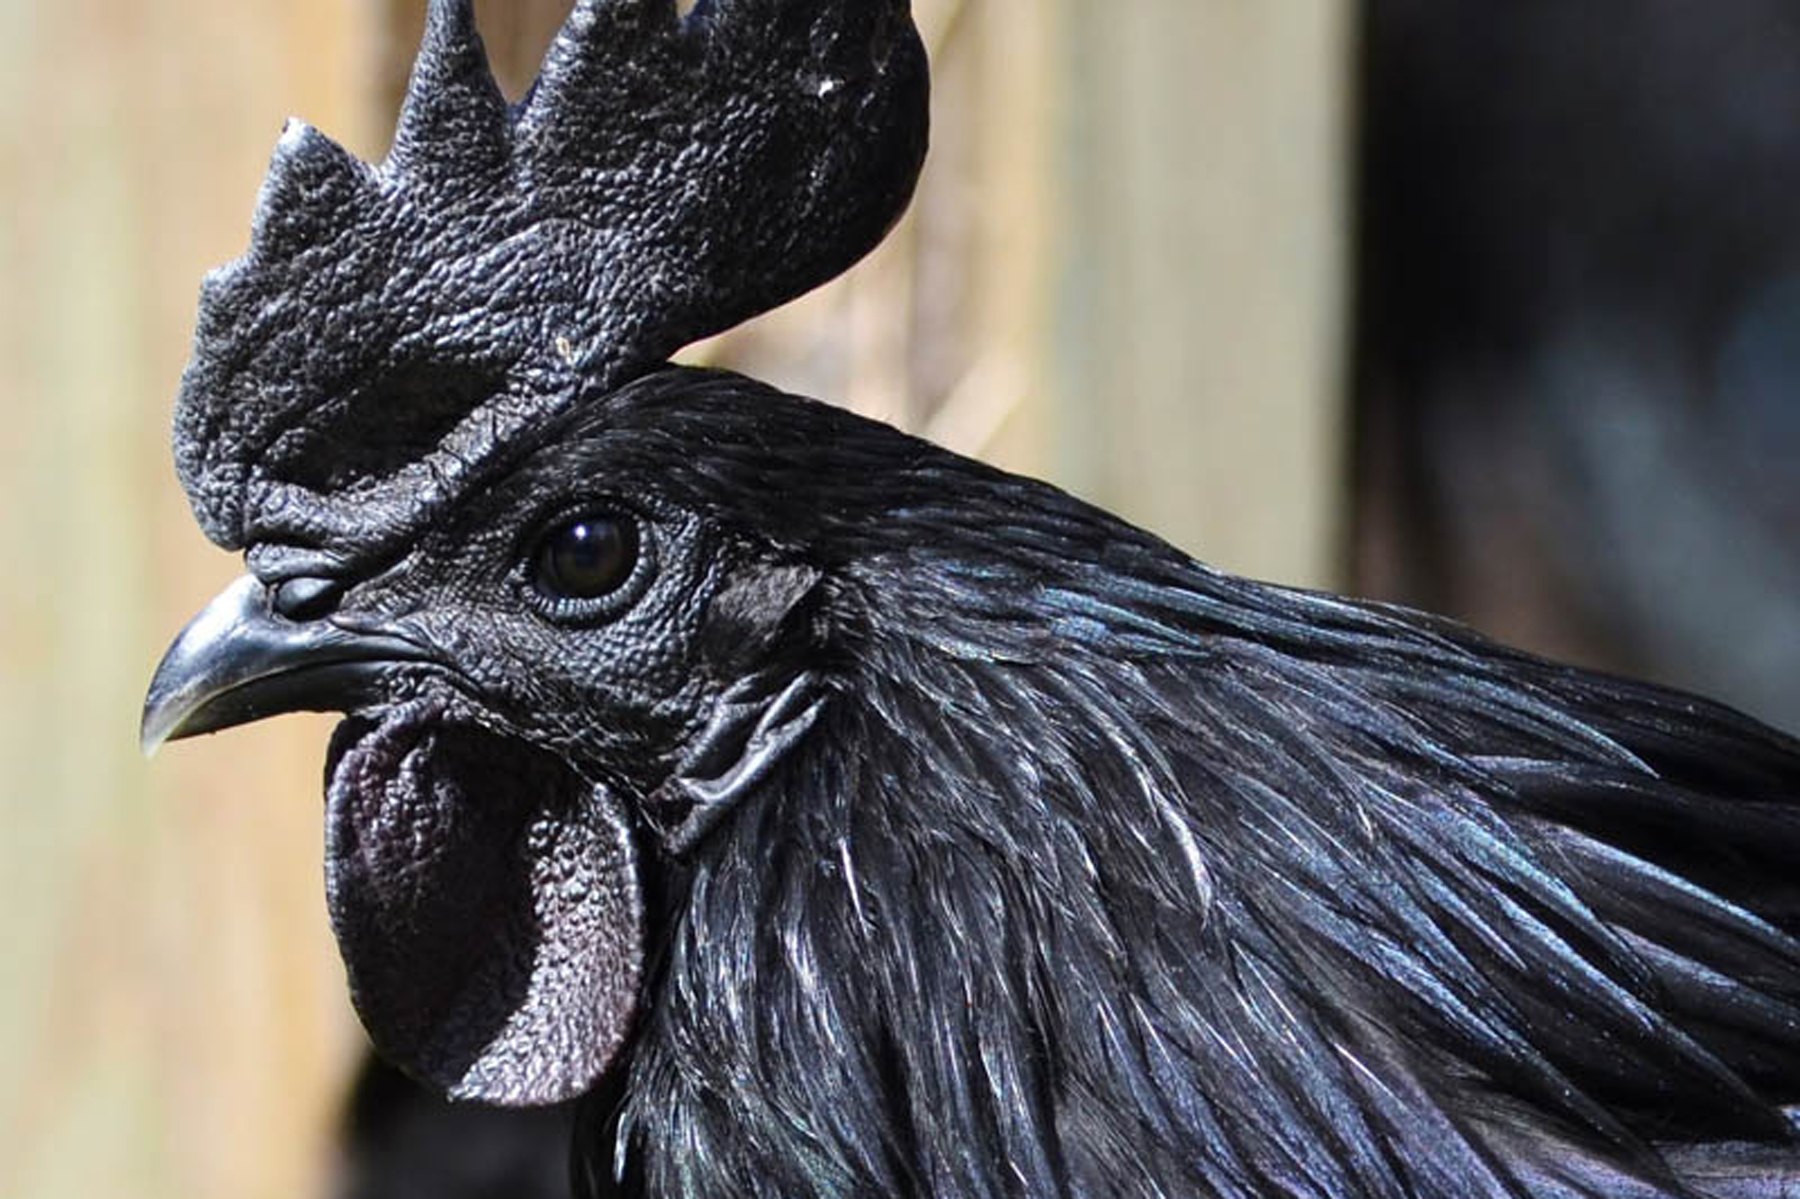 Indonesia s Jet Black Chickens Are the Dark Side of 